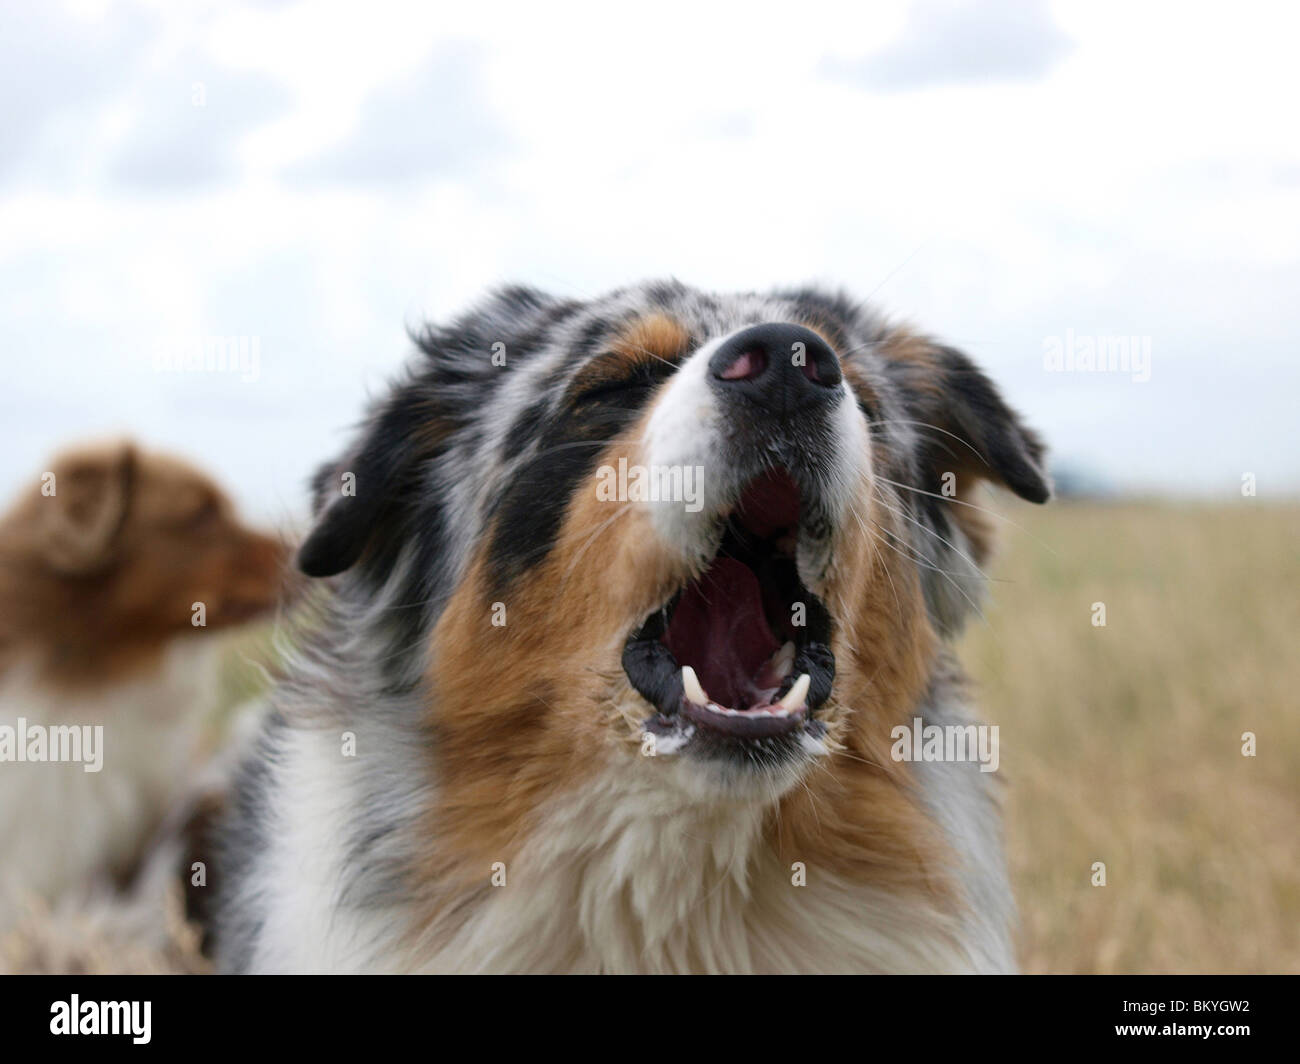 Aussie Barking High Resolution Stock Photography and Images - Alamy